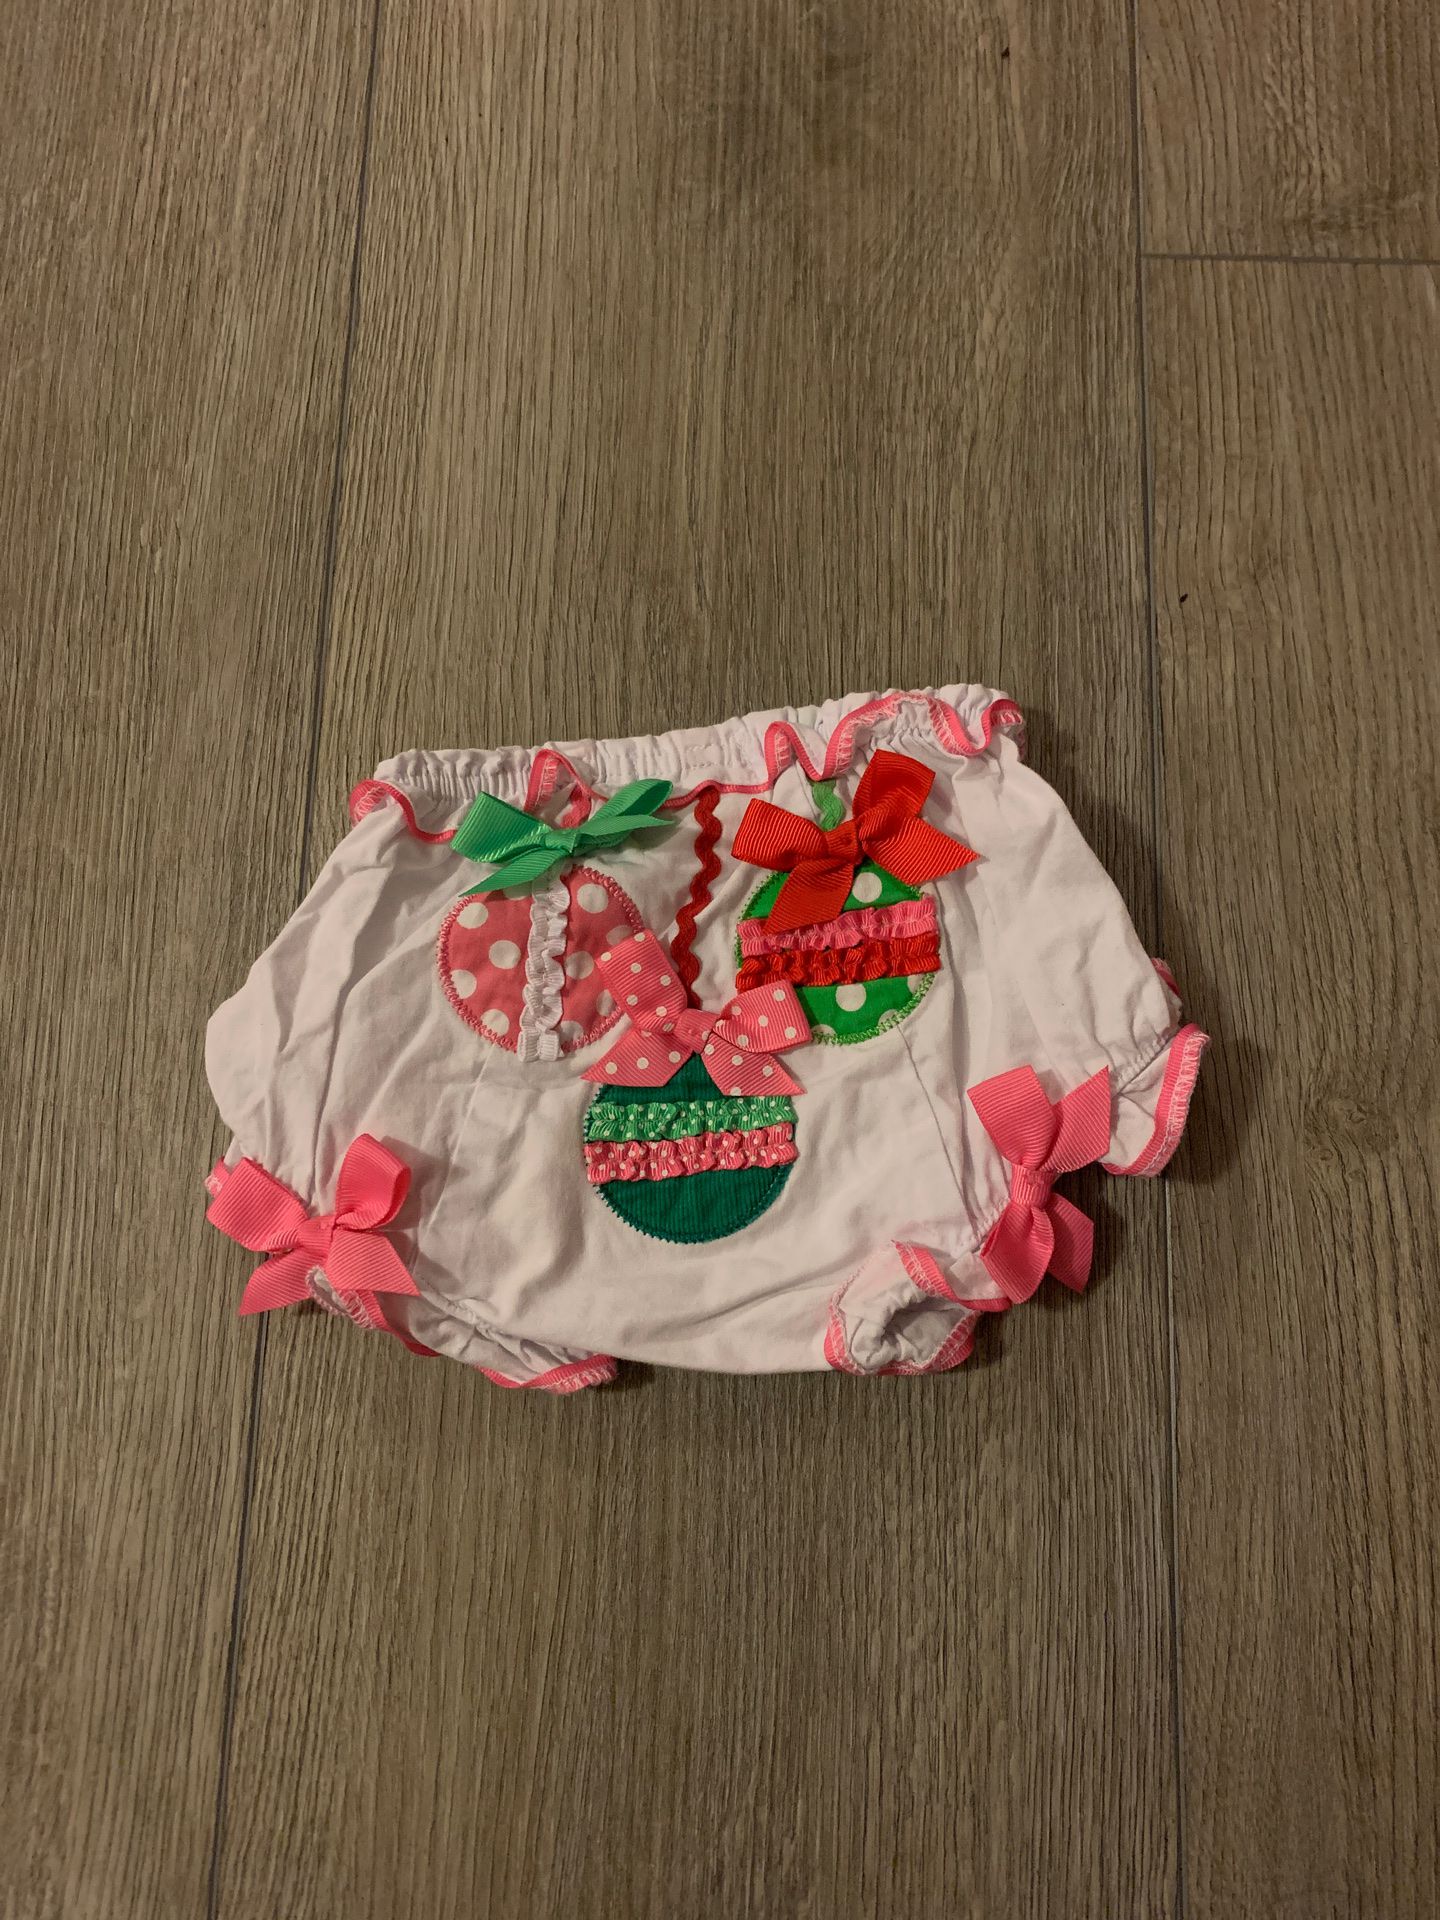 Mud Pie holiday baby girl diaper cover 0-6 months